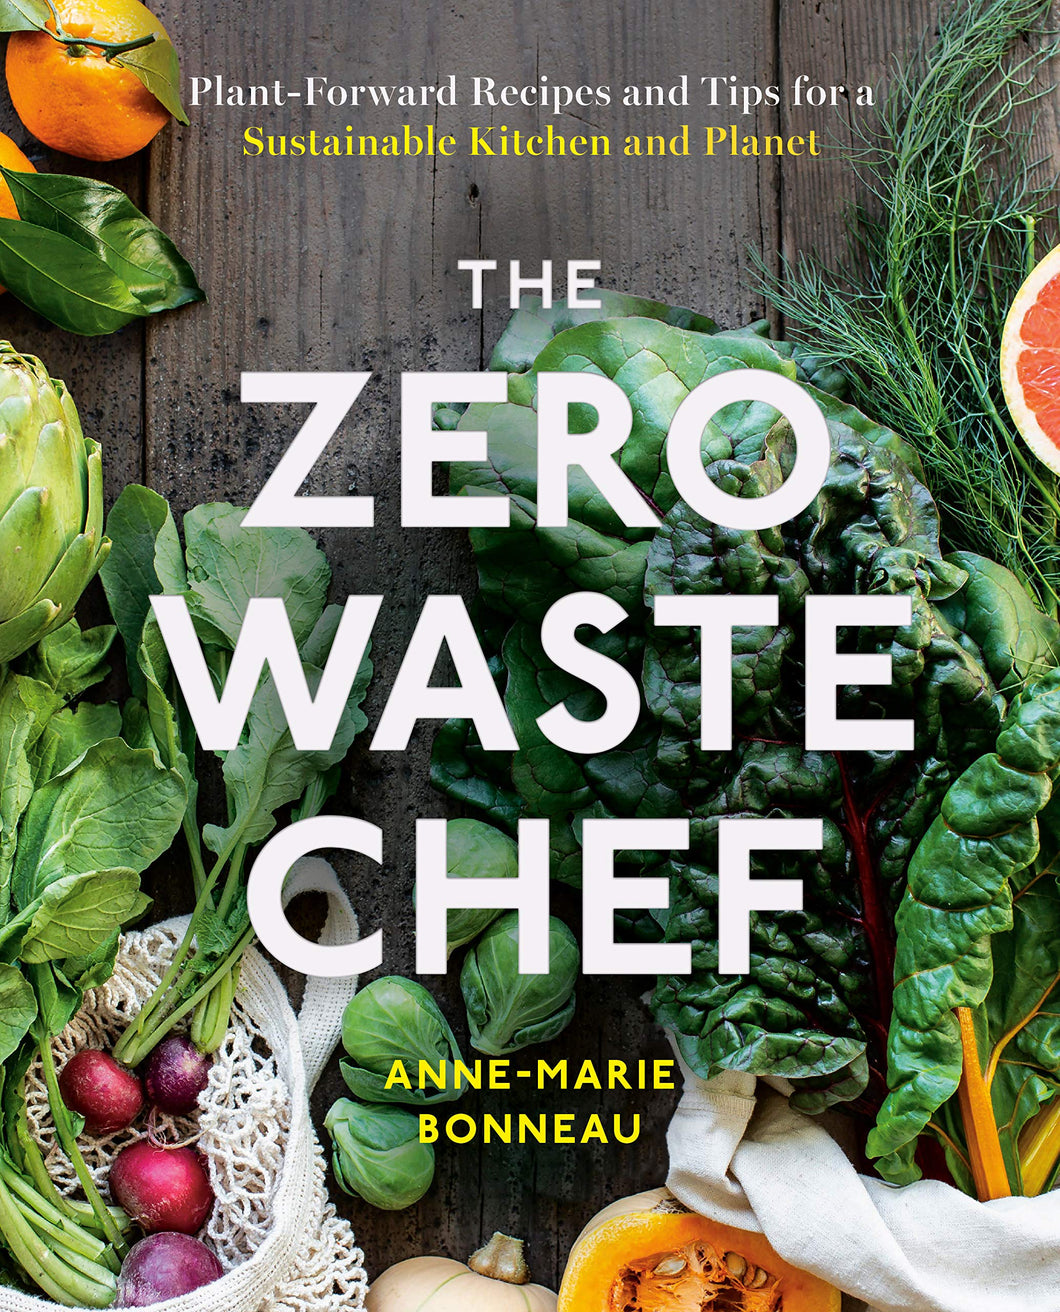 The Zero-Waste Chef Plant-Forward Recipes and Tips for a Sustainable Kitchen and Planet Written by  Anne-Marie Bonneau